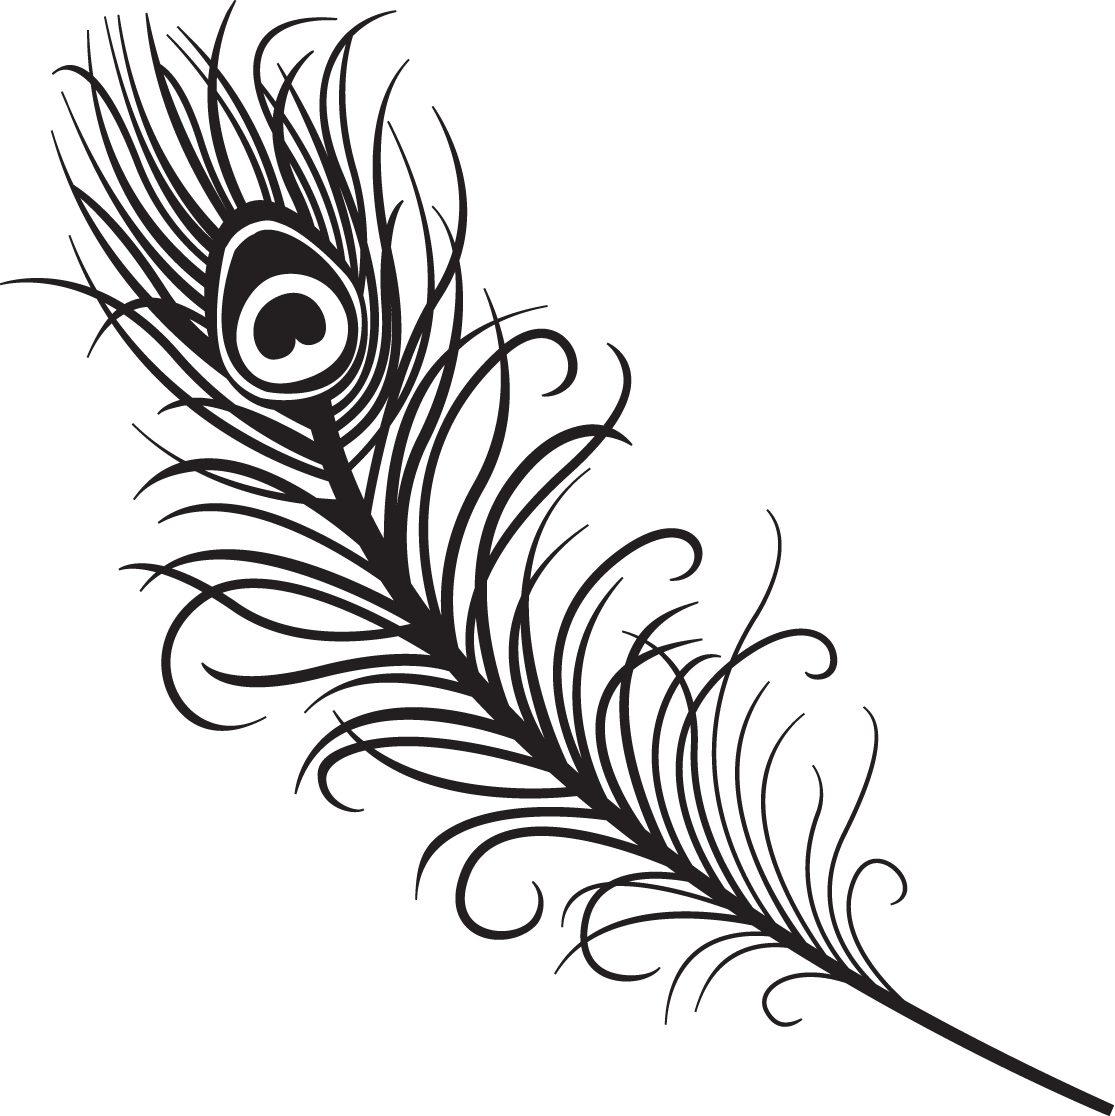 577 Peacock Feather free clipart.